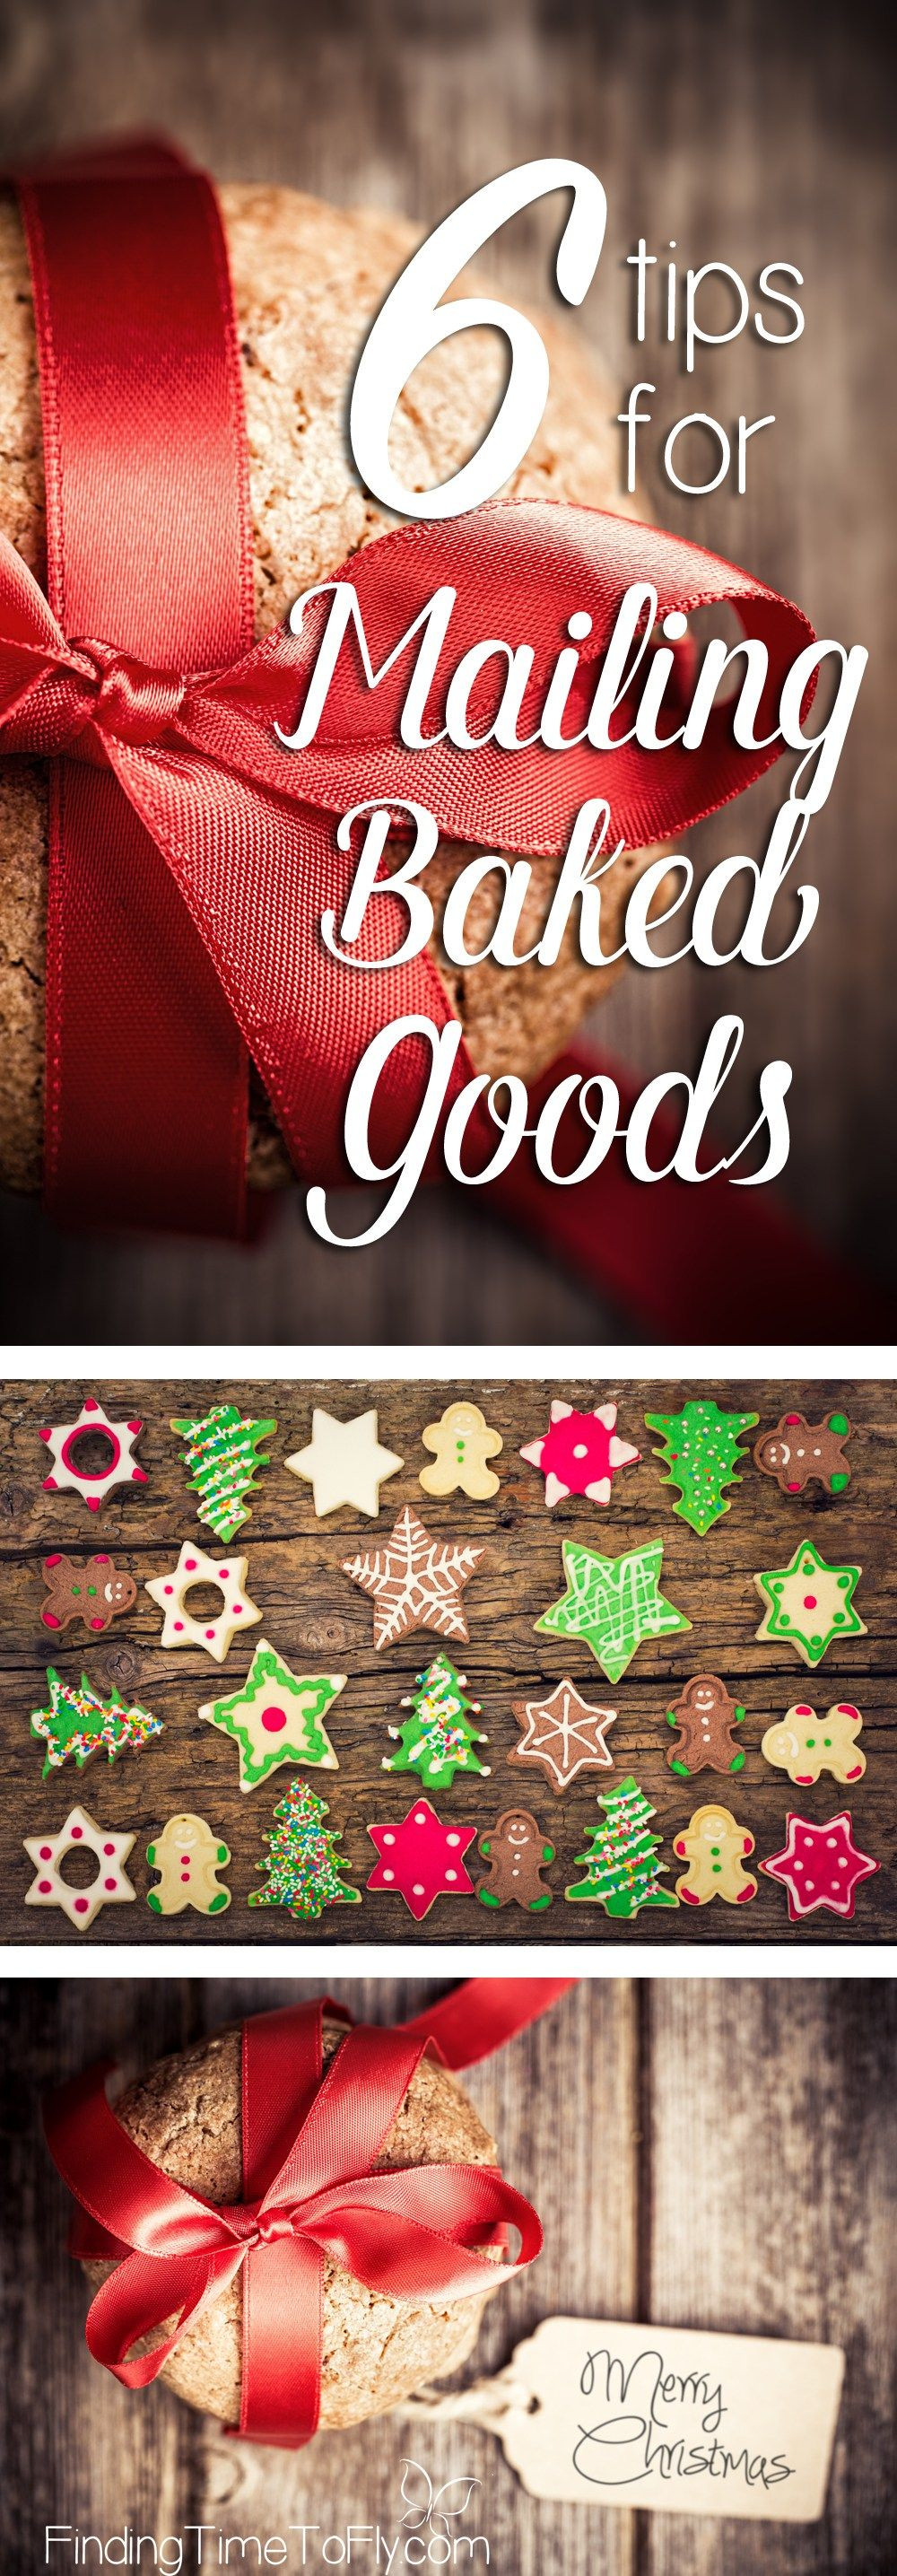 Send Christmas Cookies
 6 Tips for Mailing Baked Goods